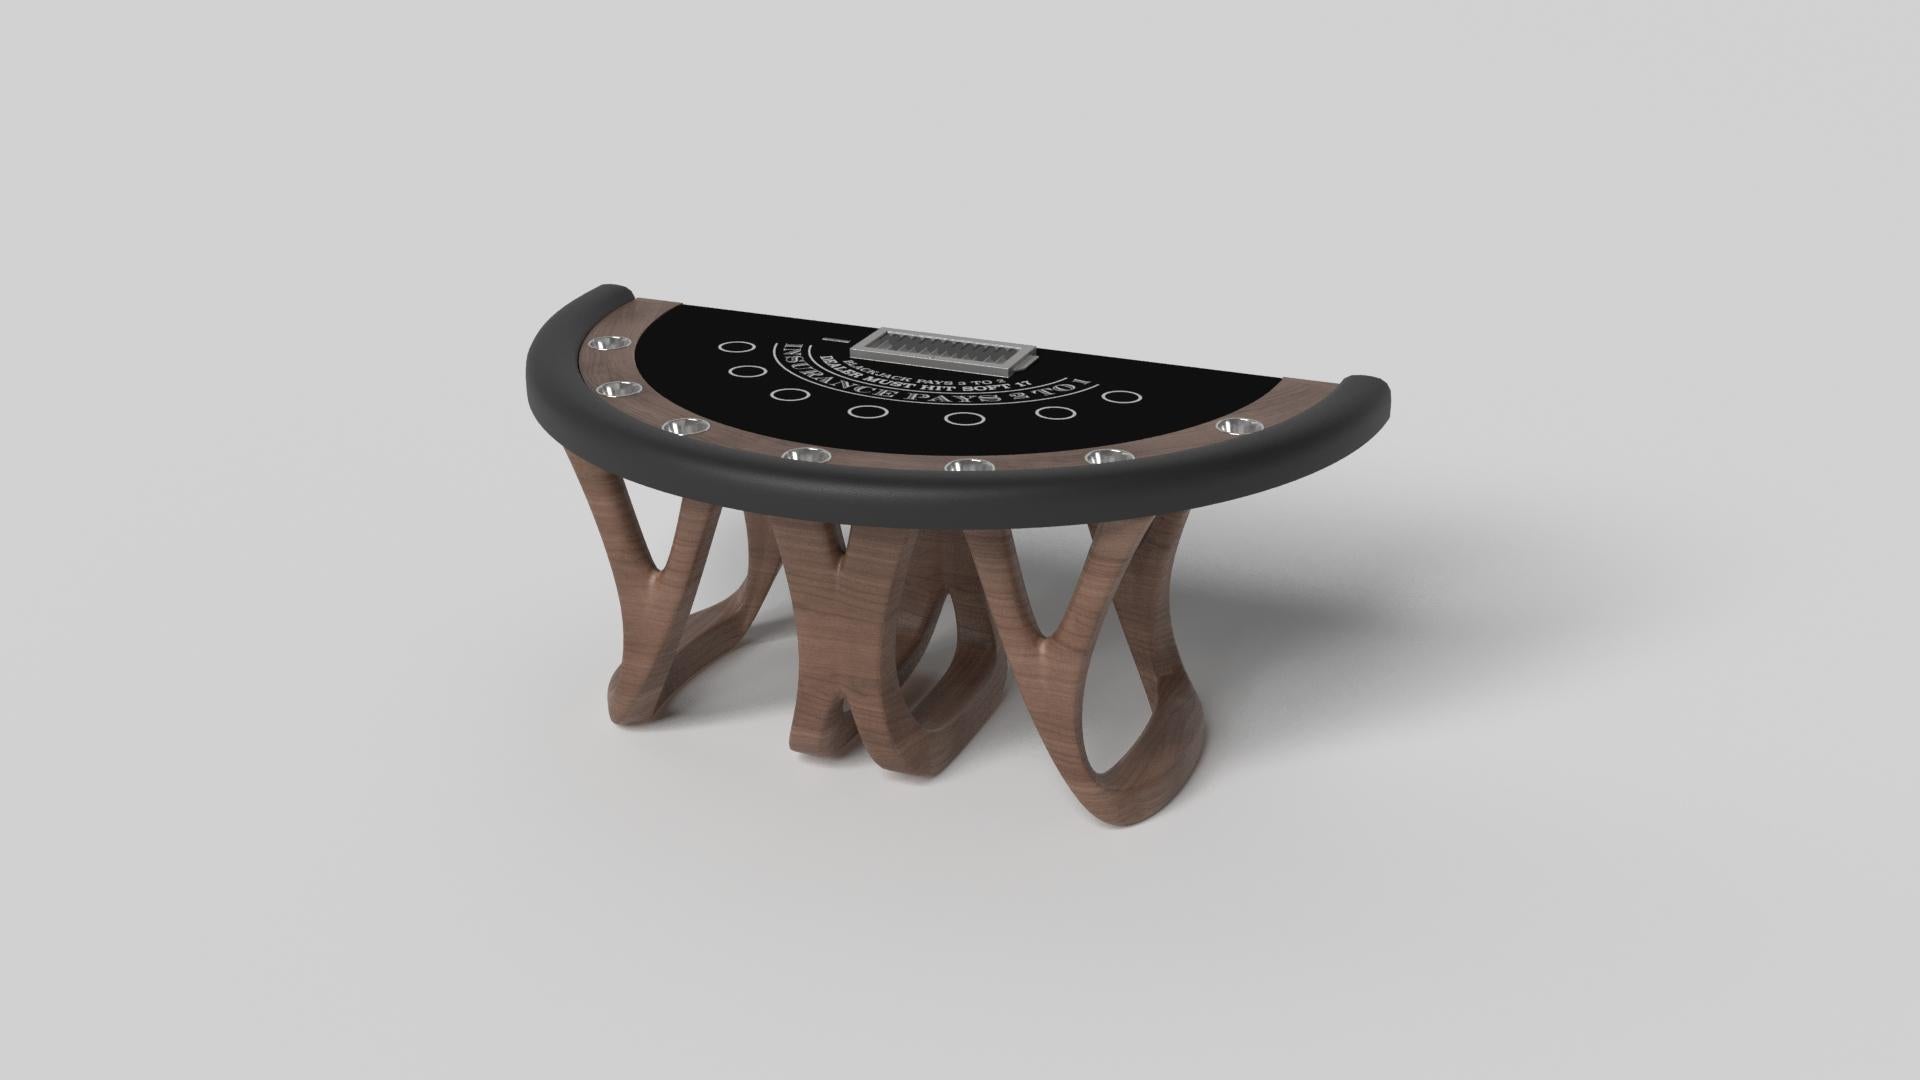 Inspired by the work of Antoni Gaudi and the movement of Catalan Modernism, the Draco blackjack table in walnut boasts bold style with smooth, curved legs and a casino-grade table top with a chip rack and betting circles for professional game play.